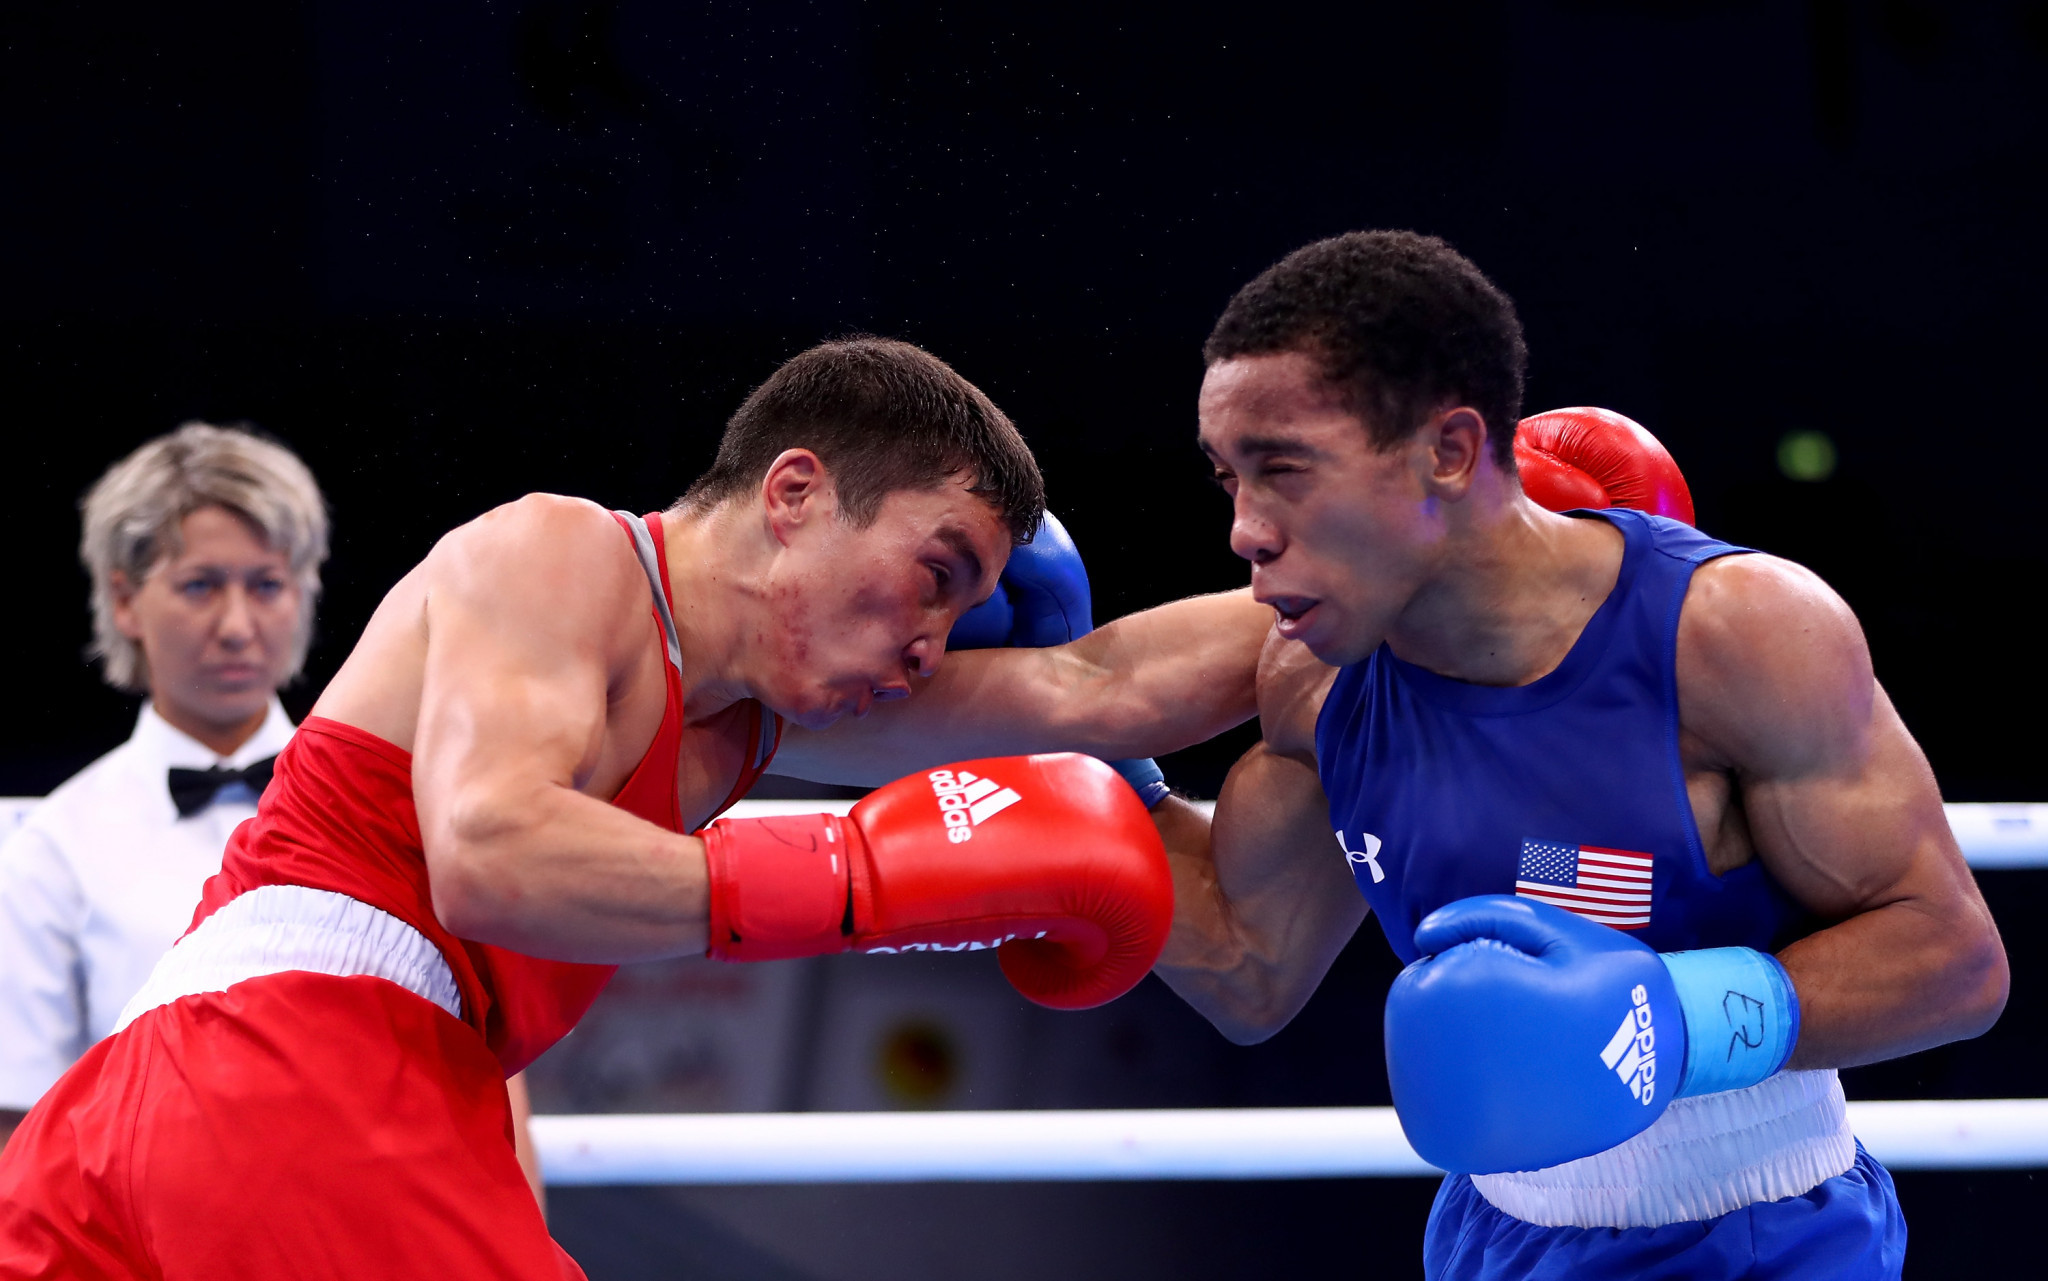 The event is seen as a boost to United States boxing ©Getty Images